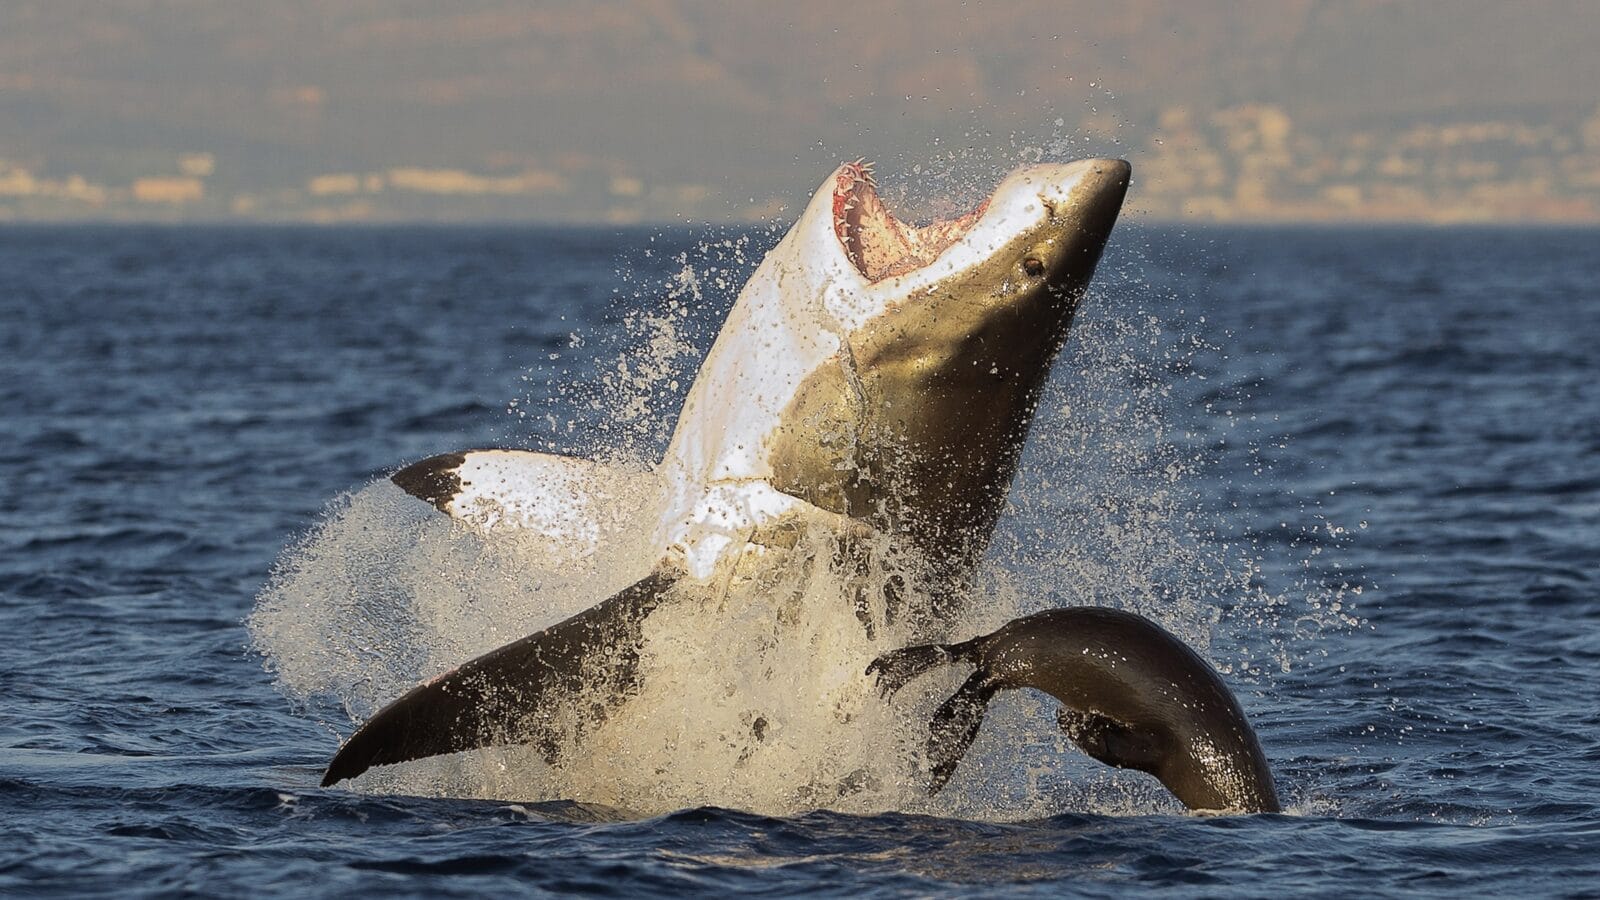 A great white shark breaching the water to get a seal.